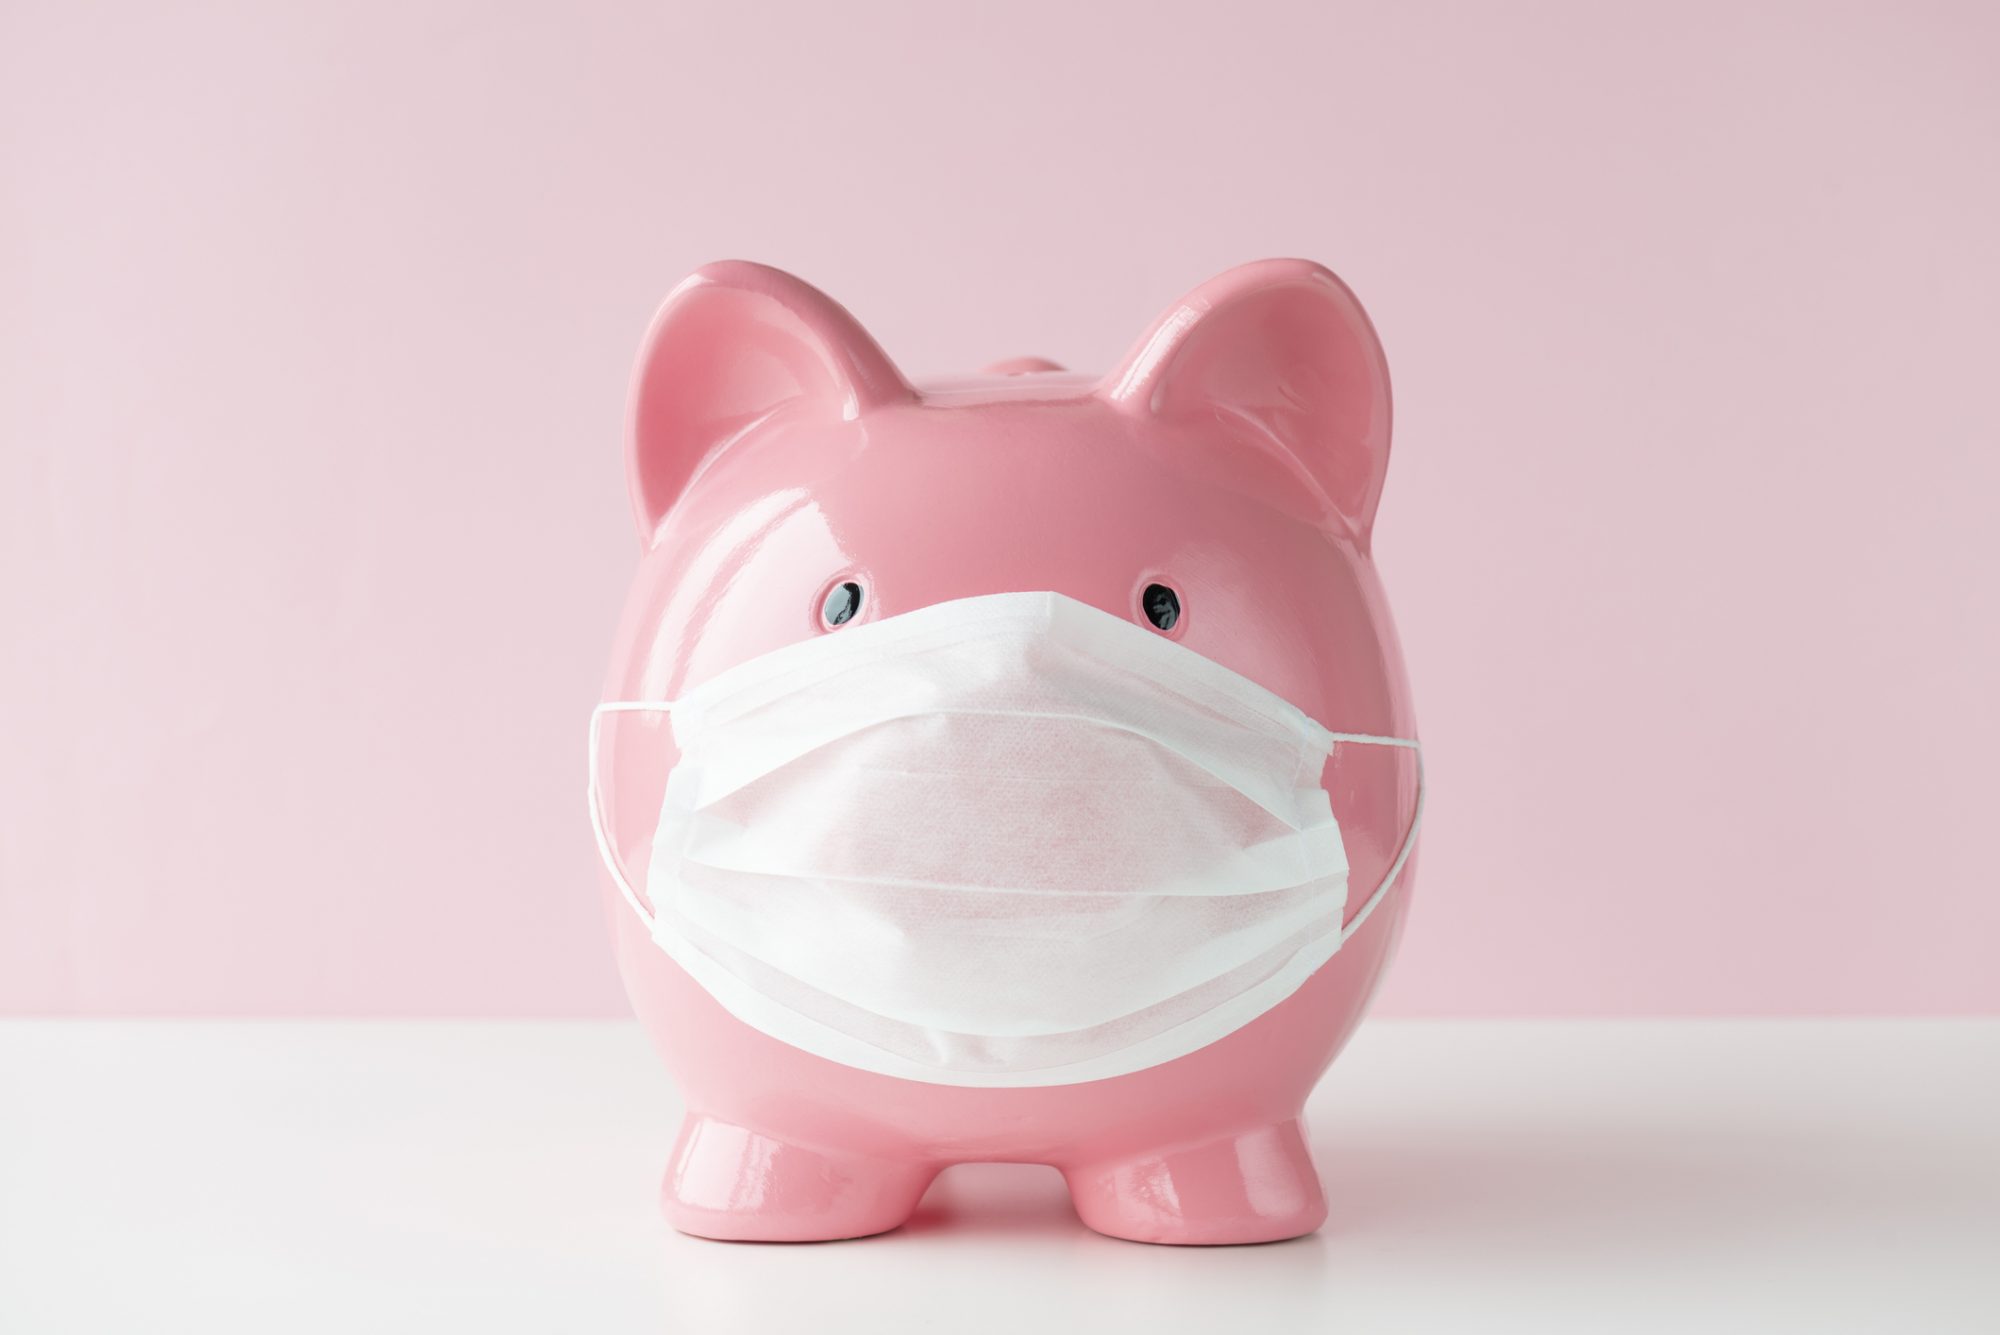 An image of a piggy bank with a mask on it.